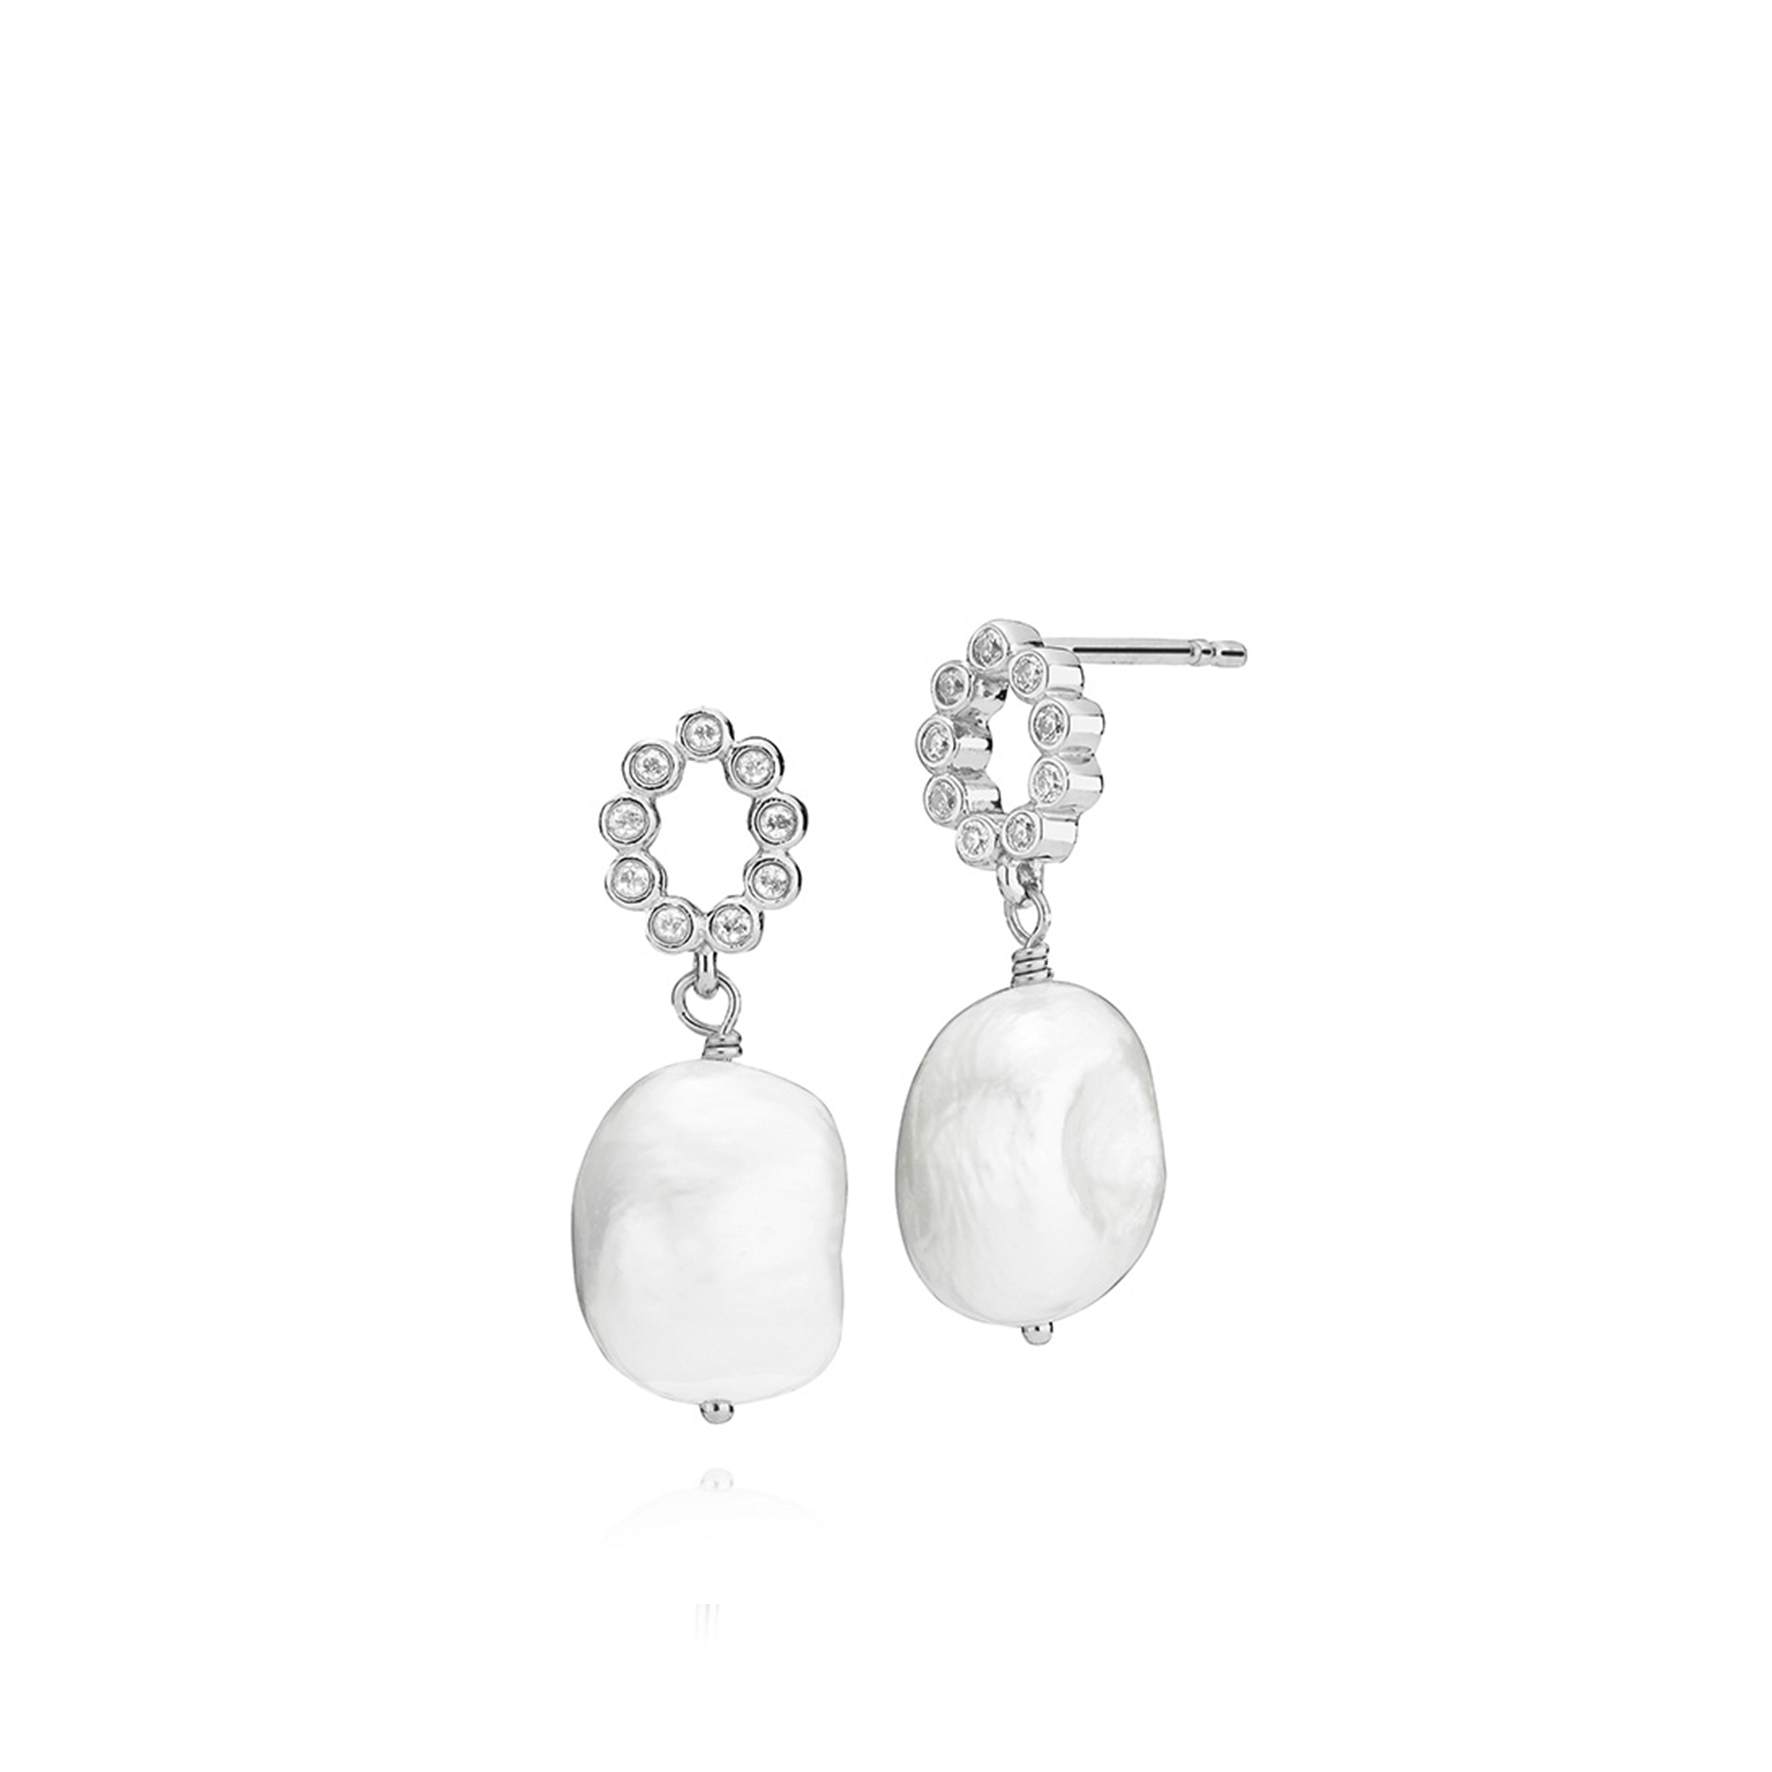 Leonora Earrings With Freshwater Pearls von Izabel Camille in Silber Sterling 925